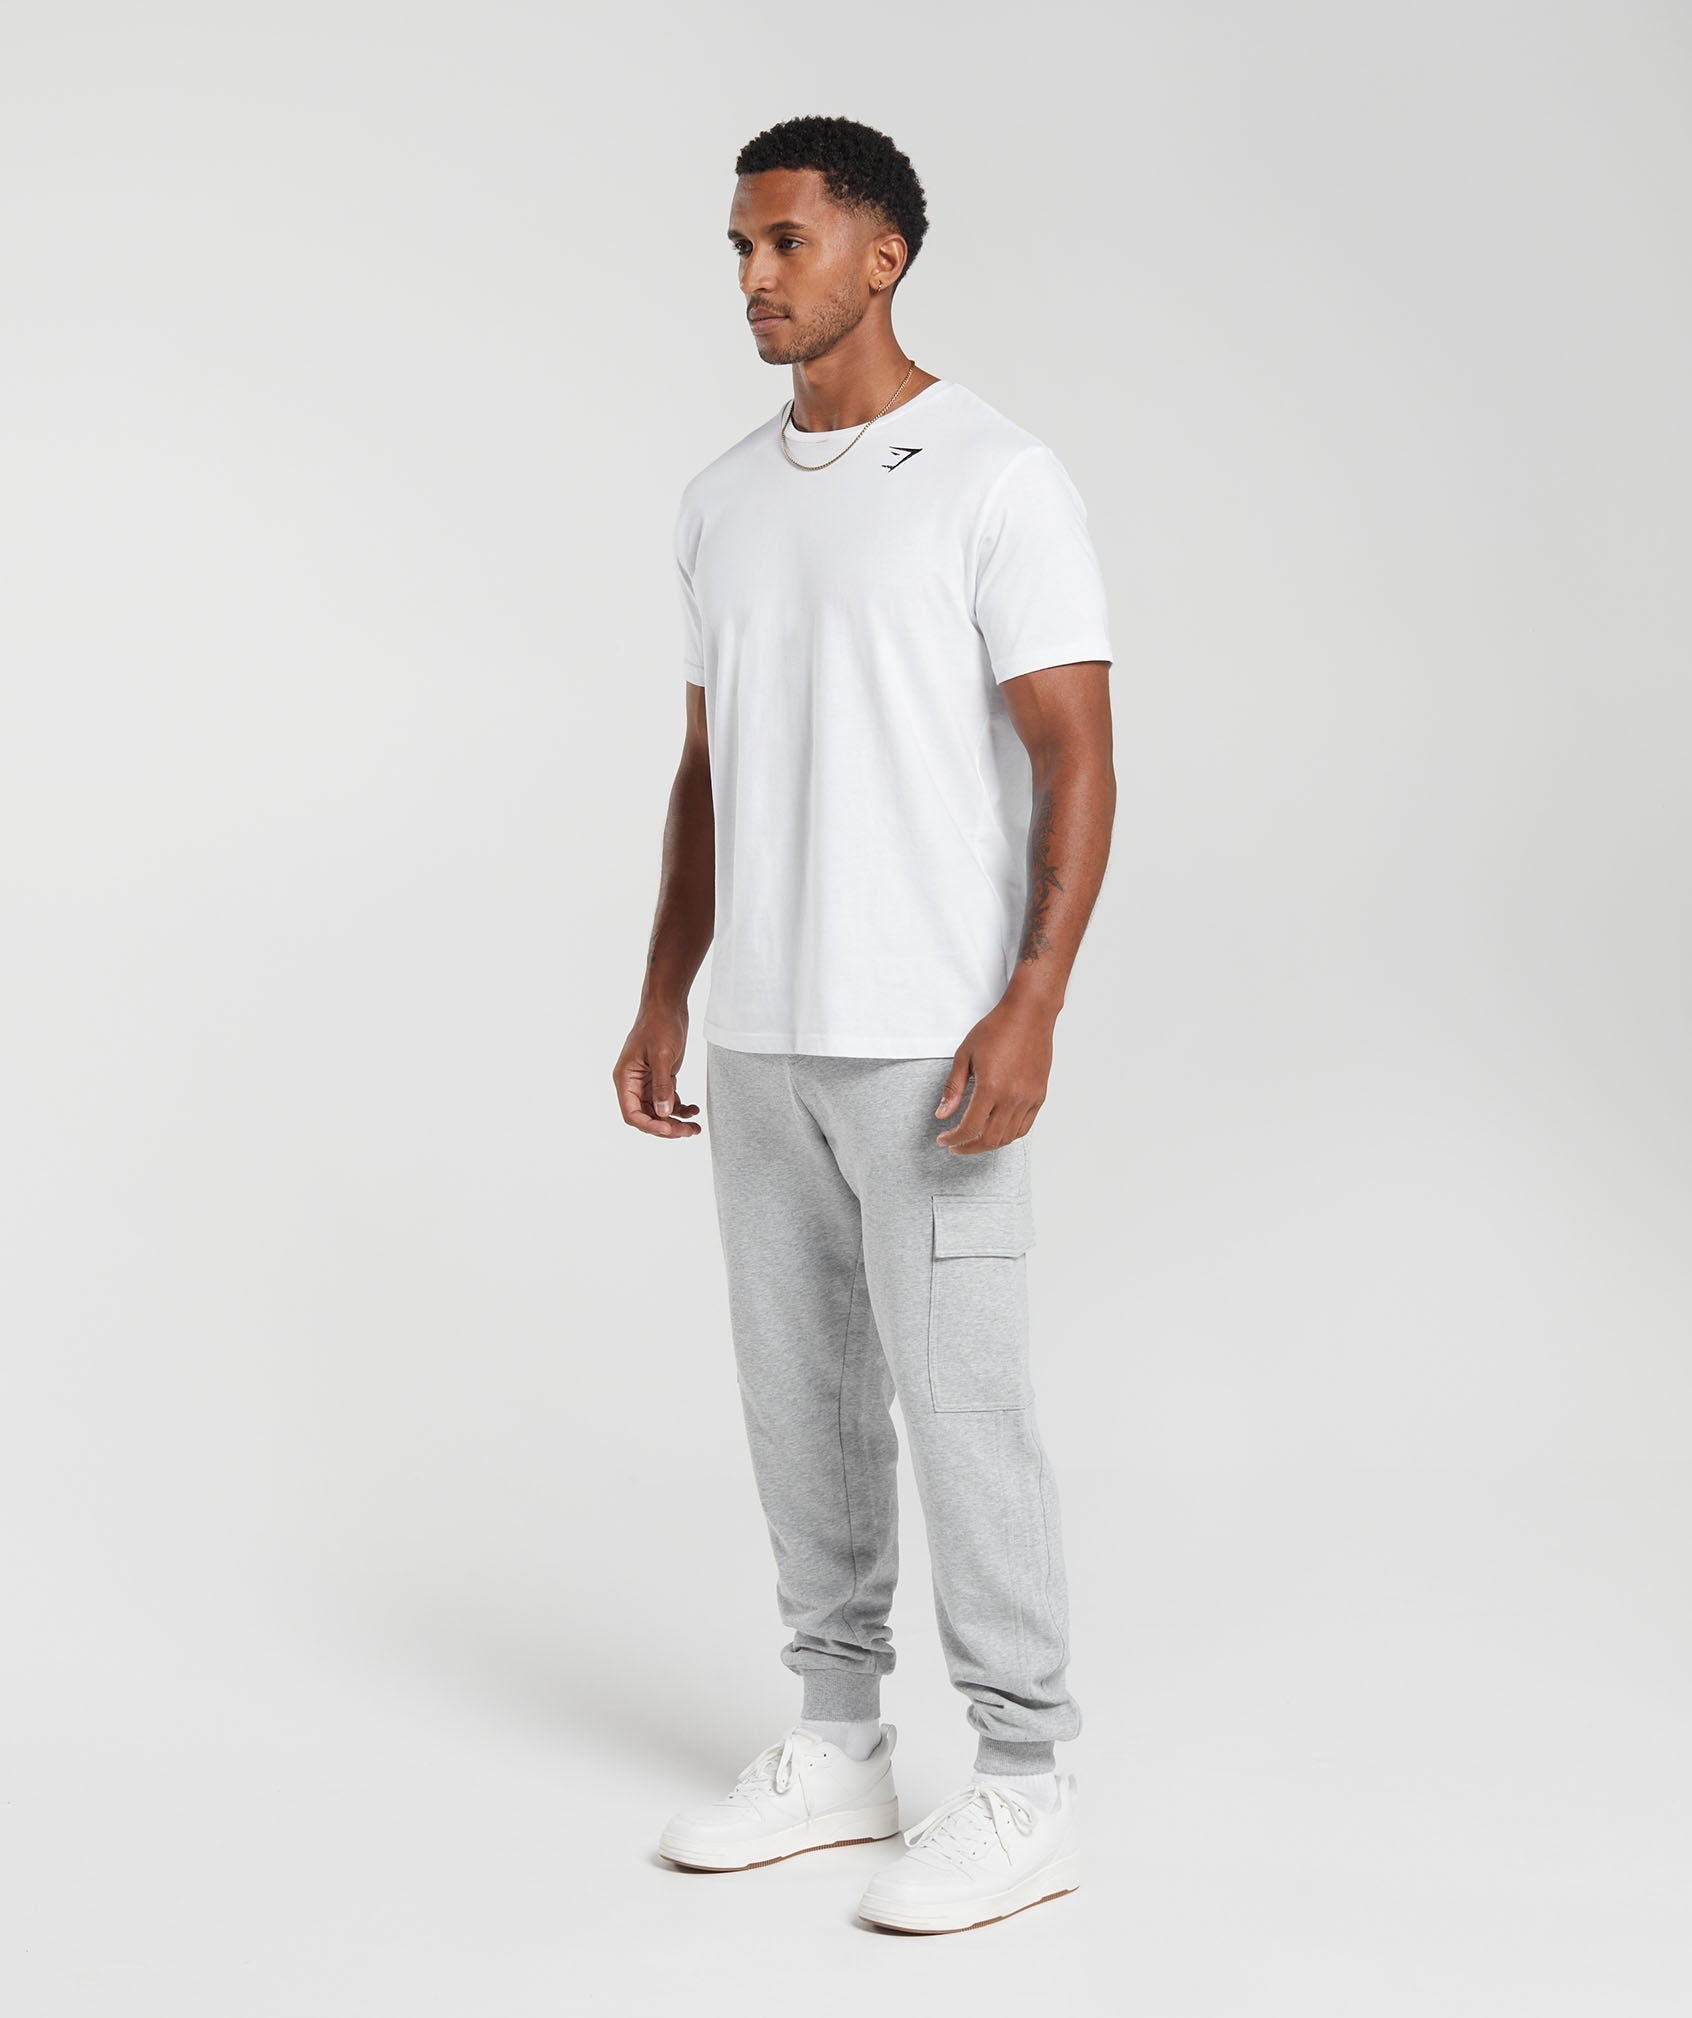 Rest Day Essentials Cargo Joggers in Light Grey Core Marl - view 4